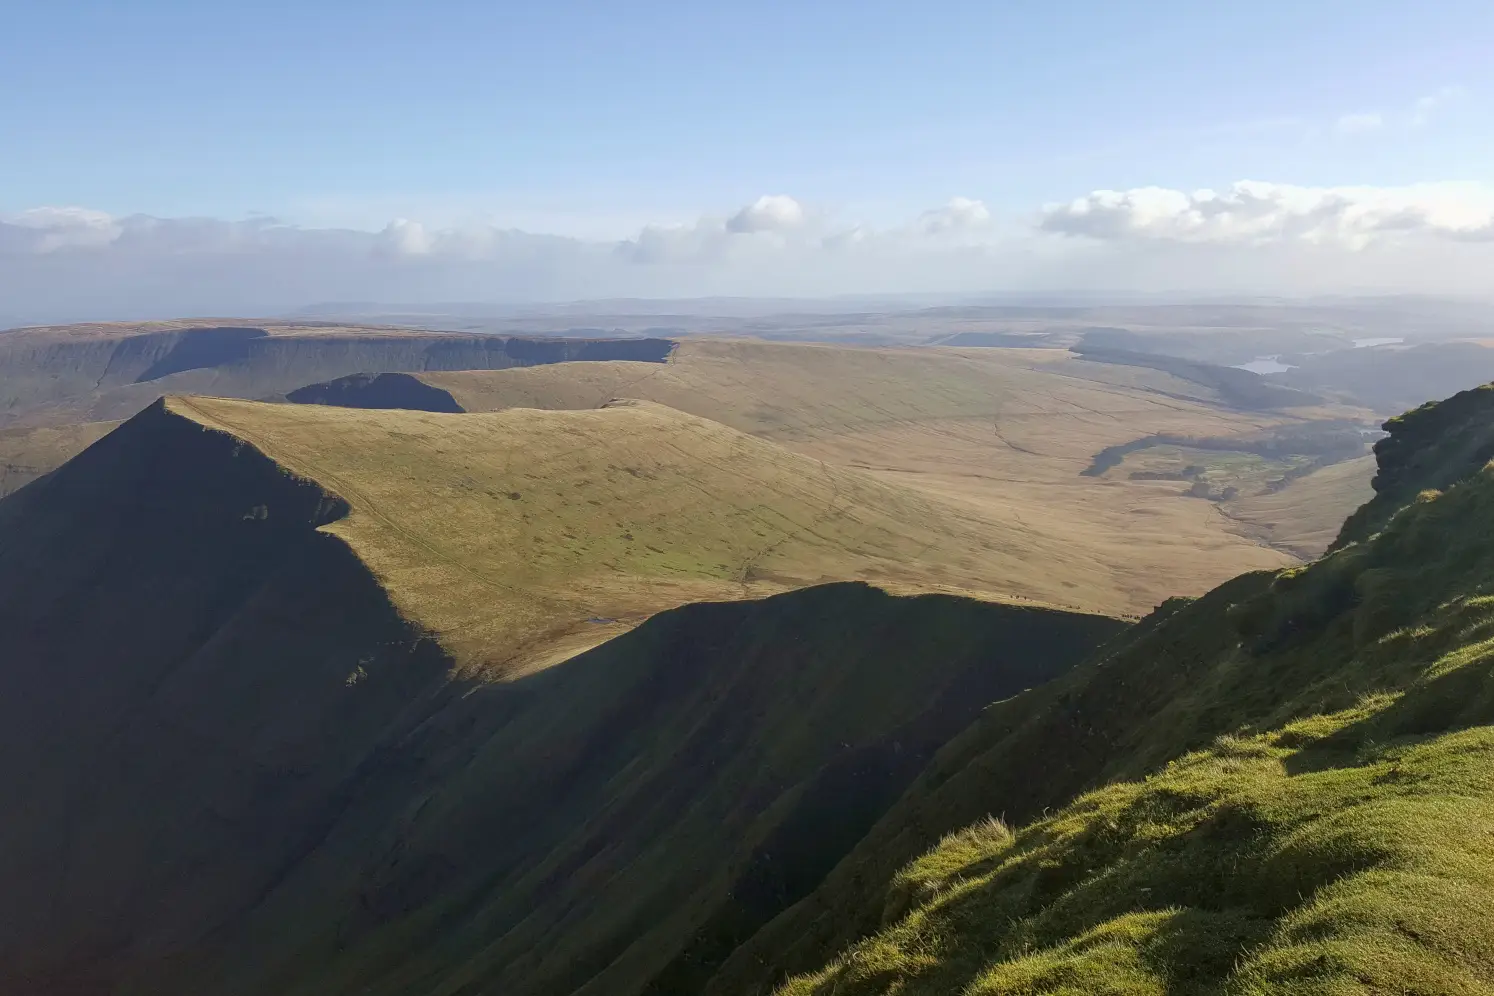 View from Pen y Fan of the Brecon Beacons mountains on the Horseshoe Ridge hike